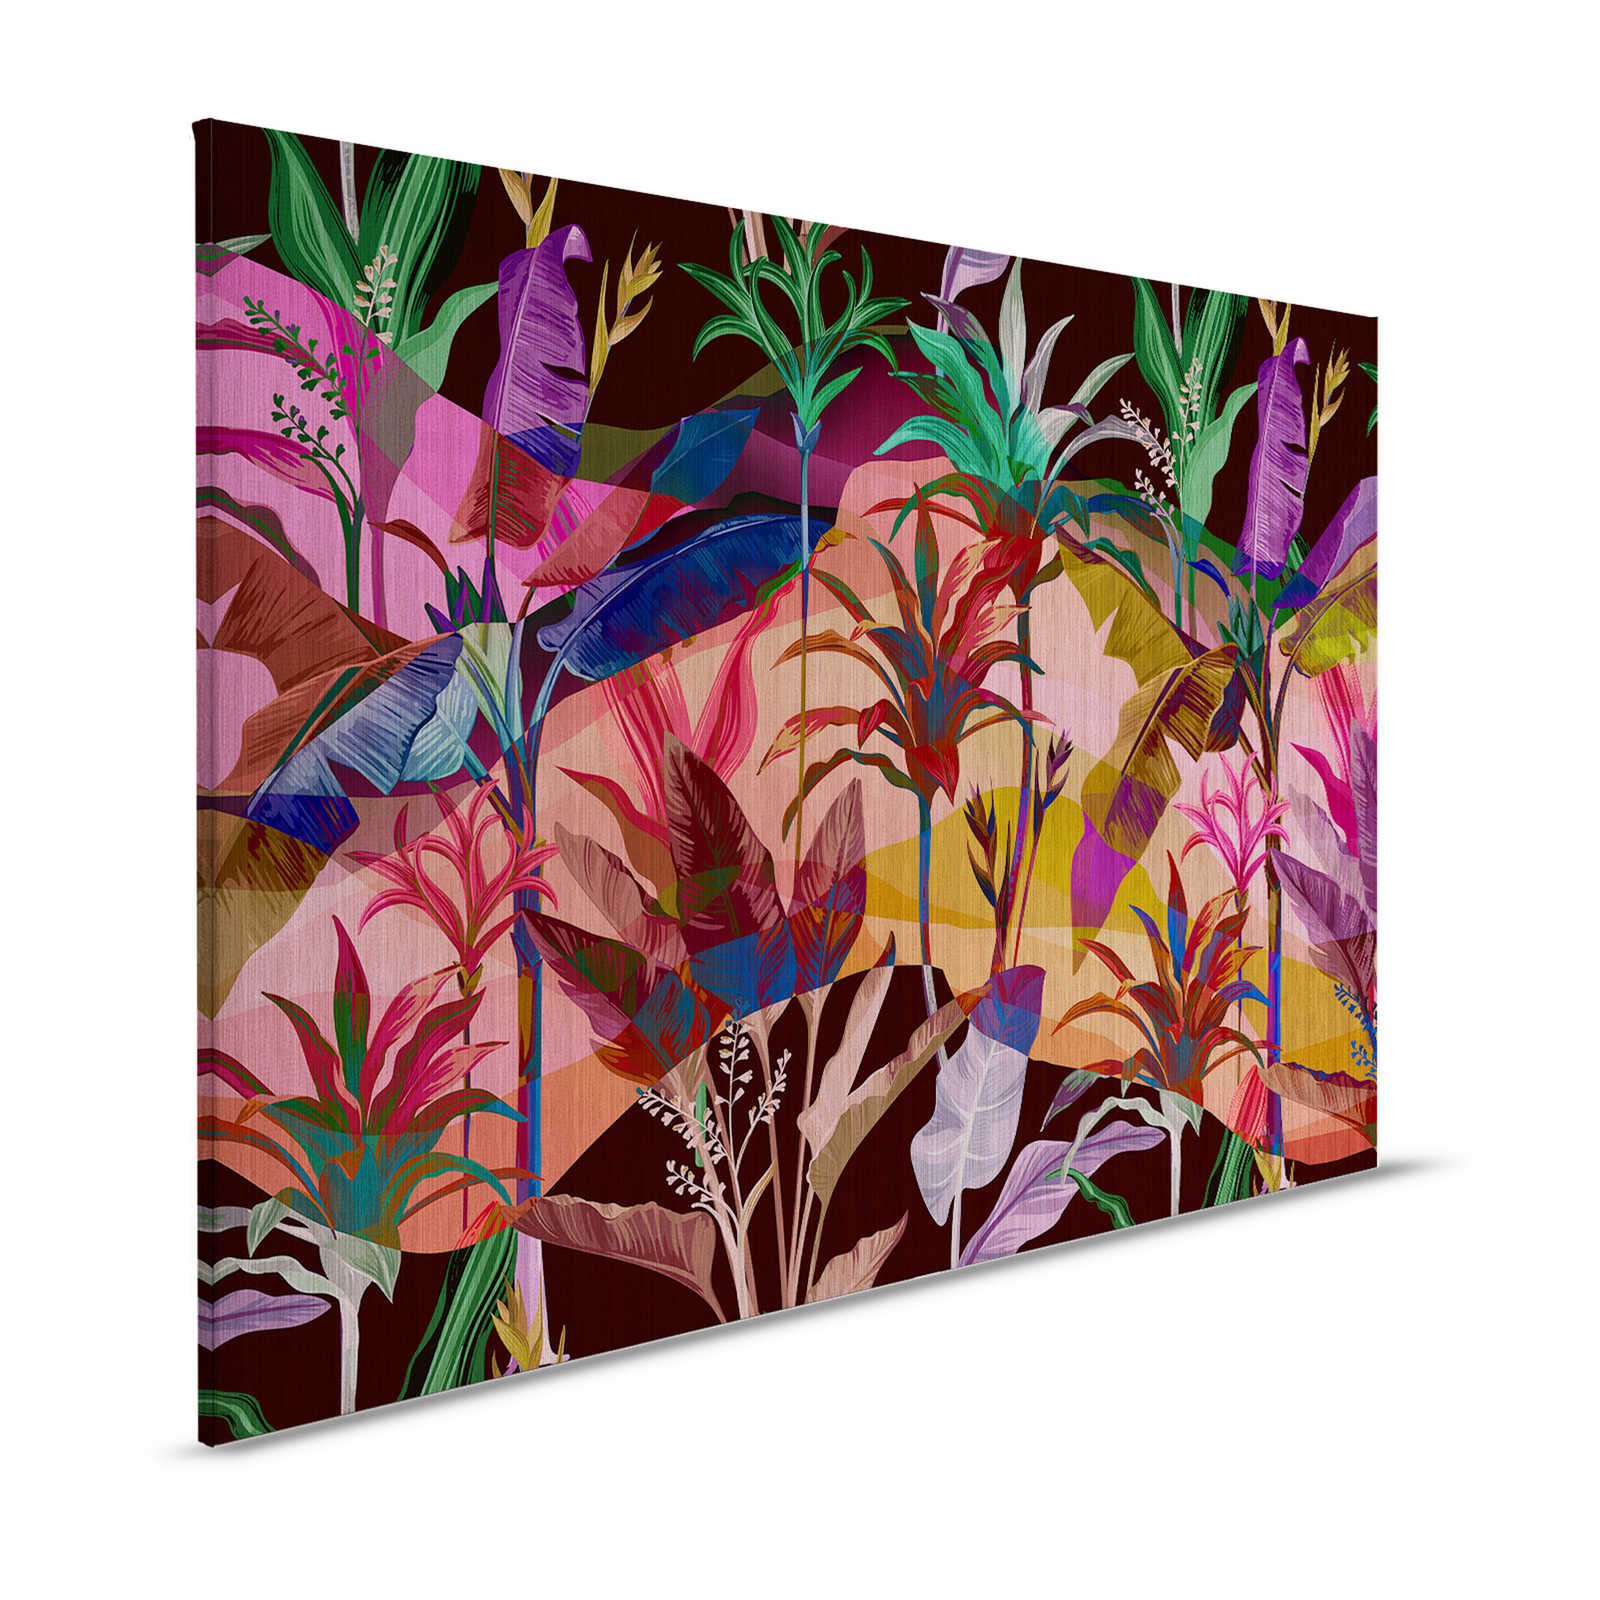 Palmyra 1 - Jungle Canvas Painting Colourful & Abstract Leaves - 1.20 m x 0.80 m
